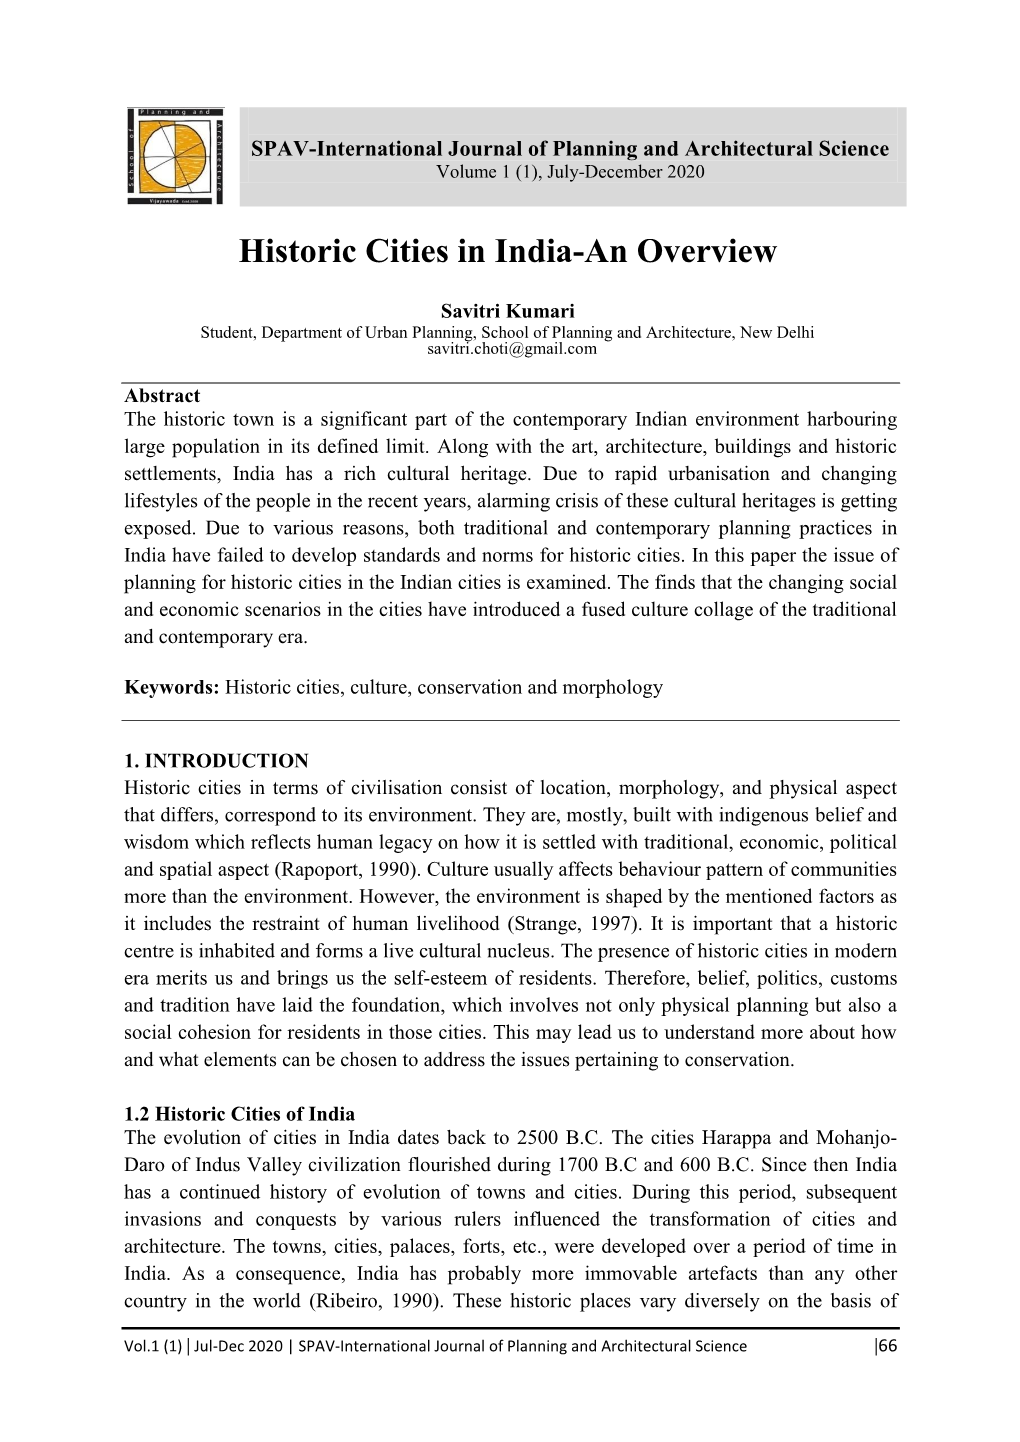 Historic Cities in India-An Overview